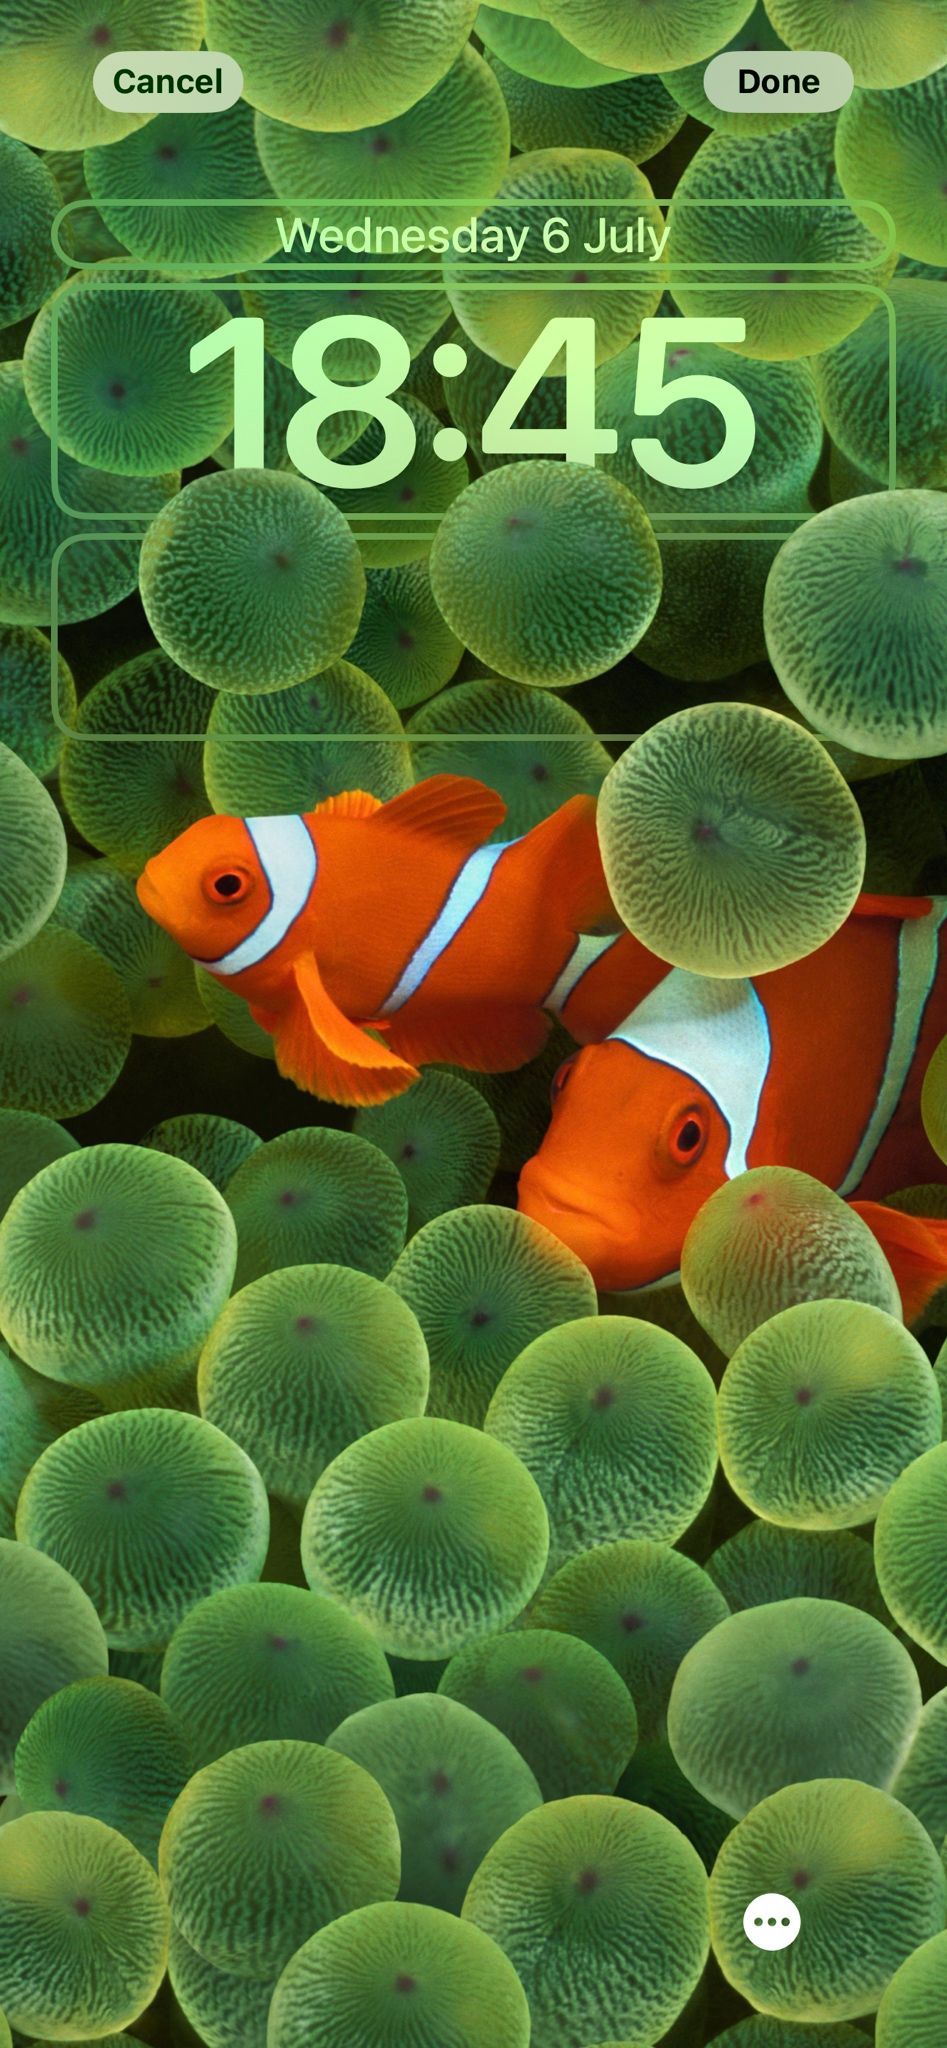 Wallpaper of two clownfishes on an iPhone